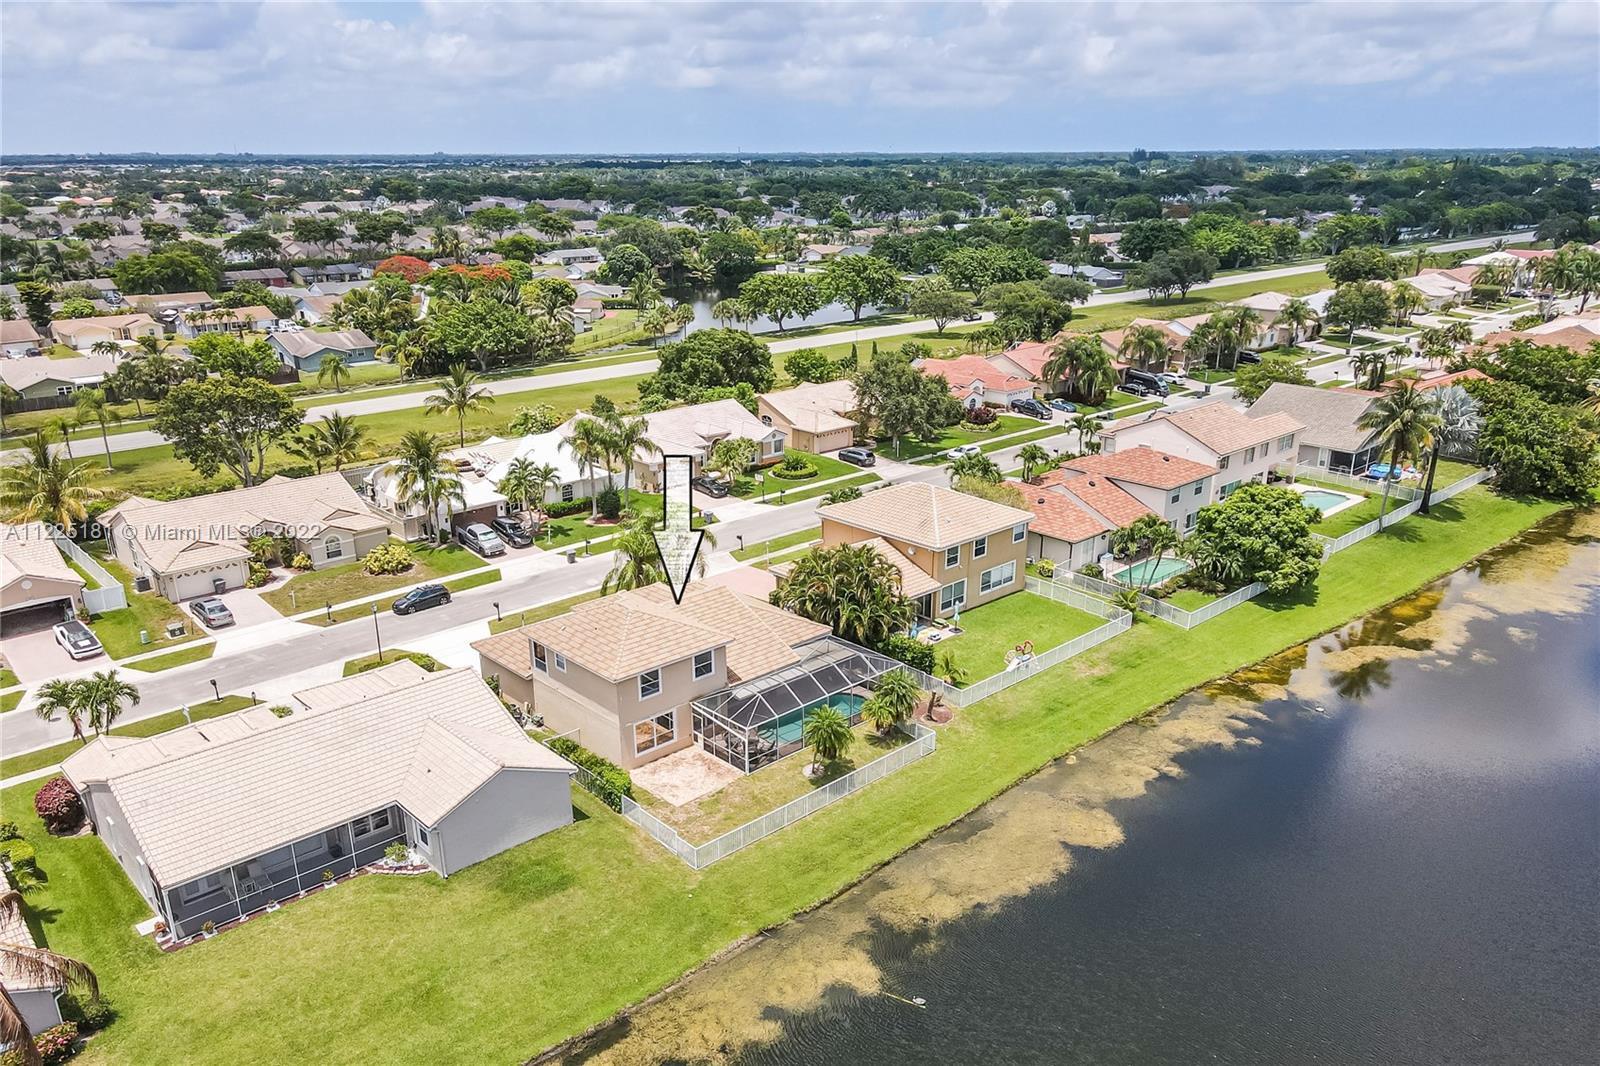 Gorgeous lakefront home with dramatic views! This two-story home is located in the beautiful neighbo